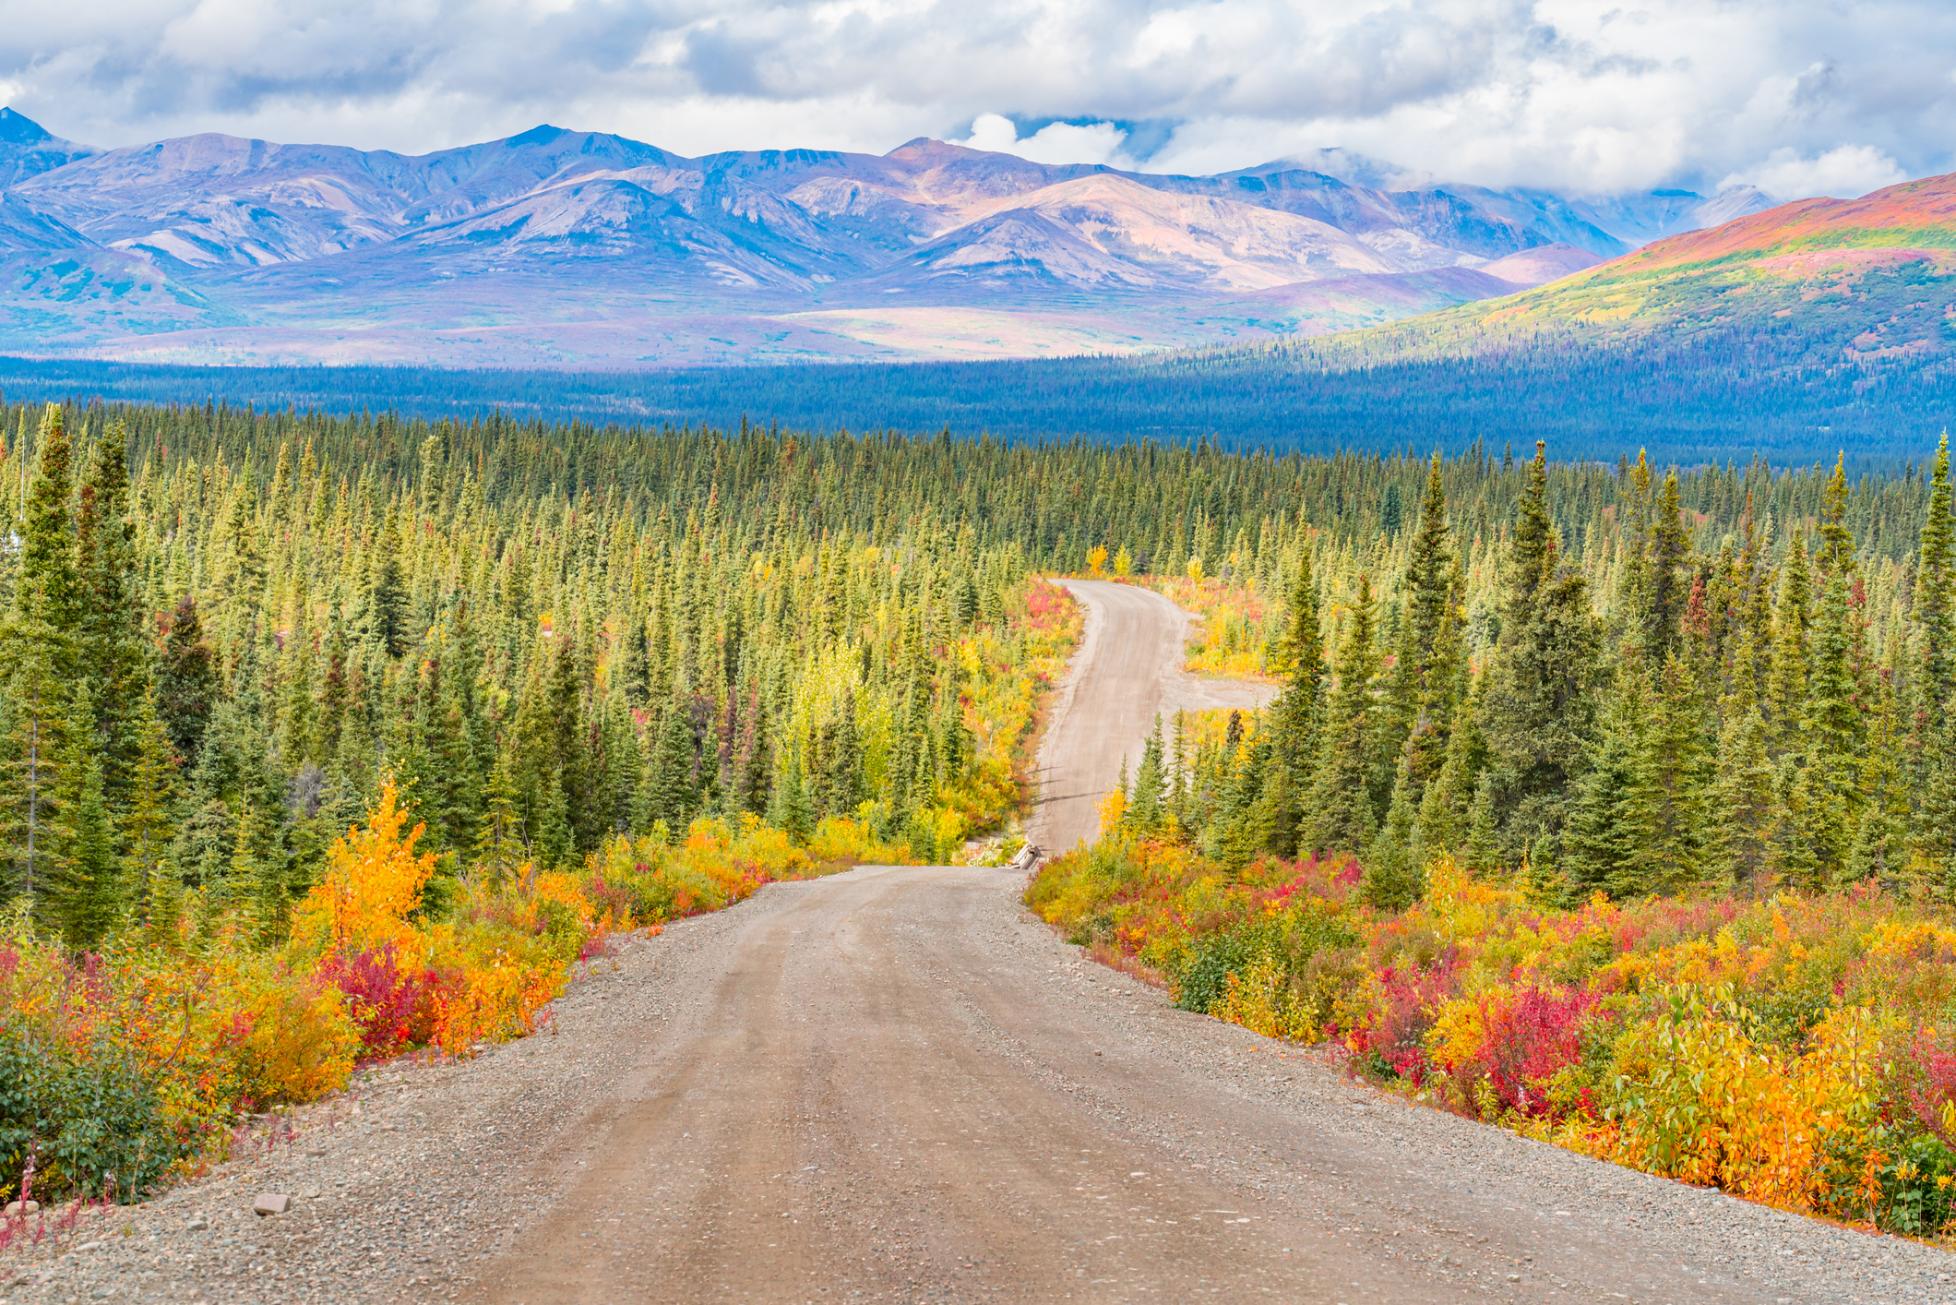 The Denali Park Road after Mile 15, where no public vehicles are allowed. Photo: Getty.